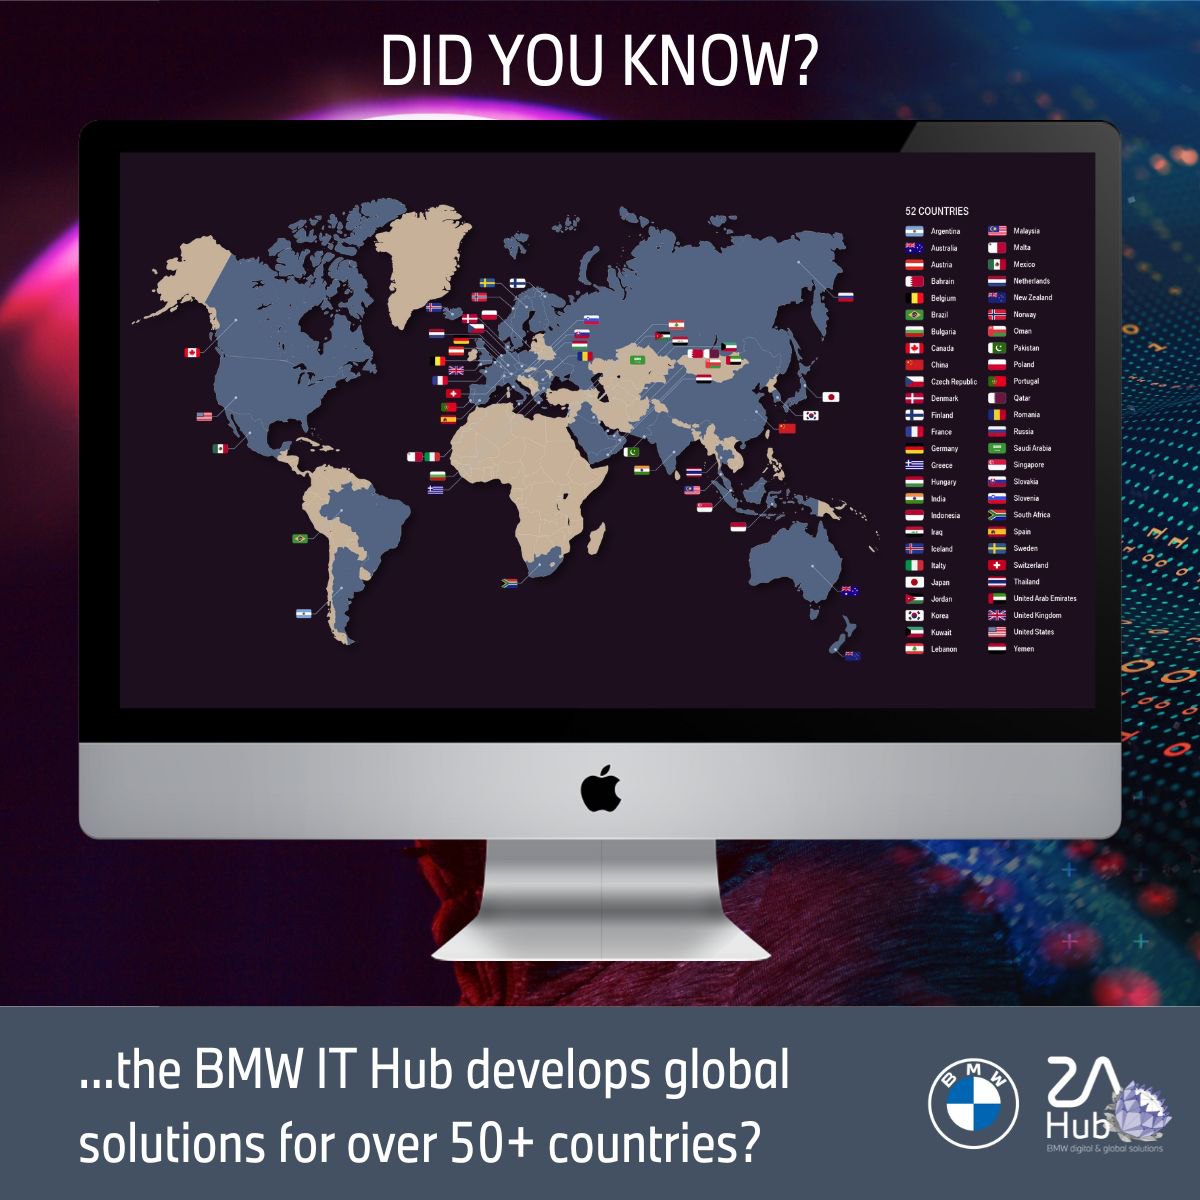 The BMW IT Hub develops global solutions for over 50 countries.